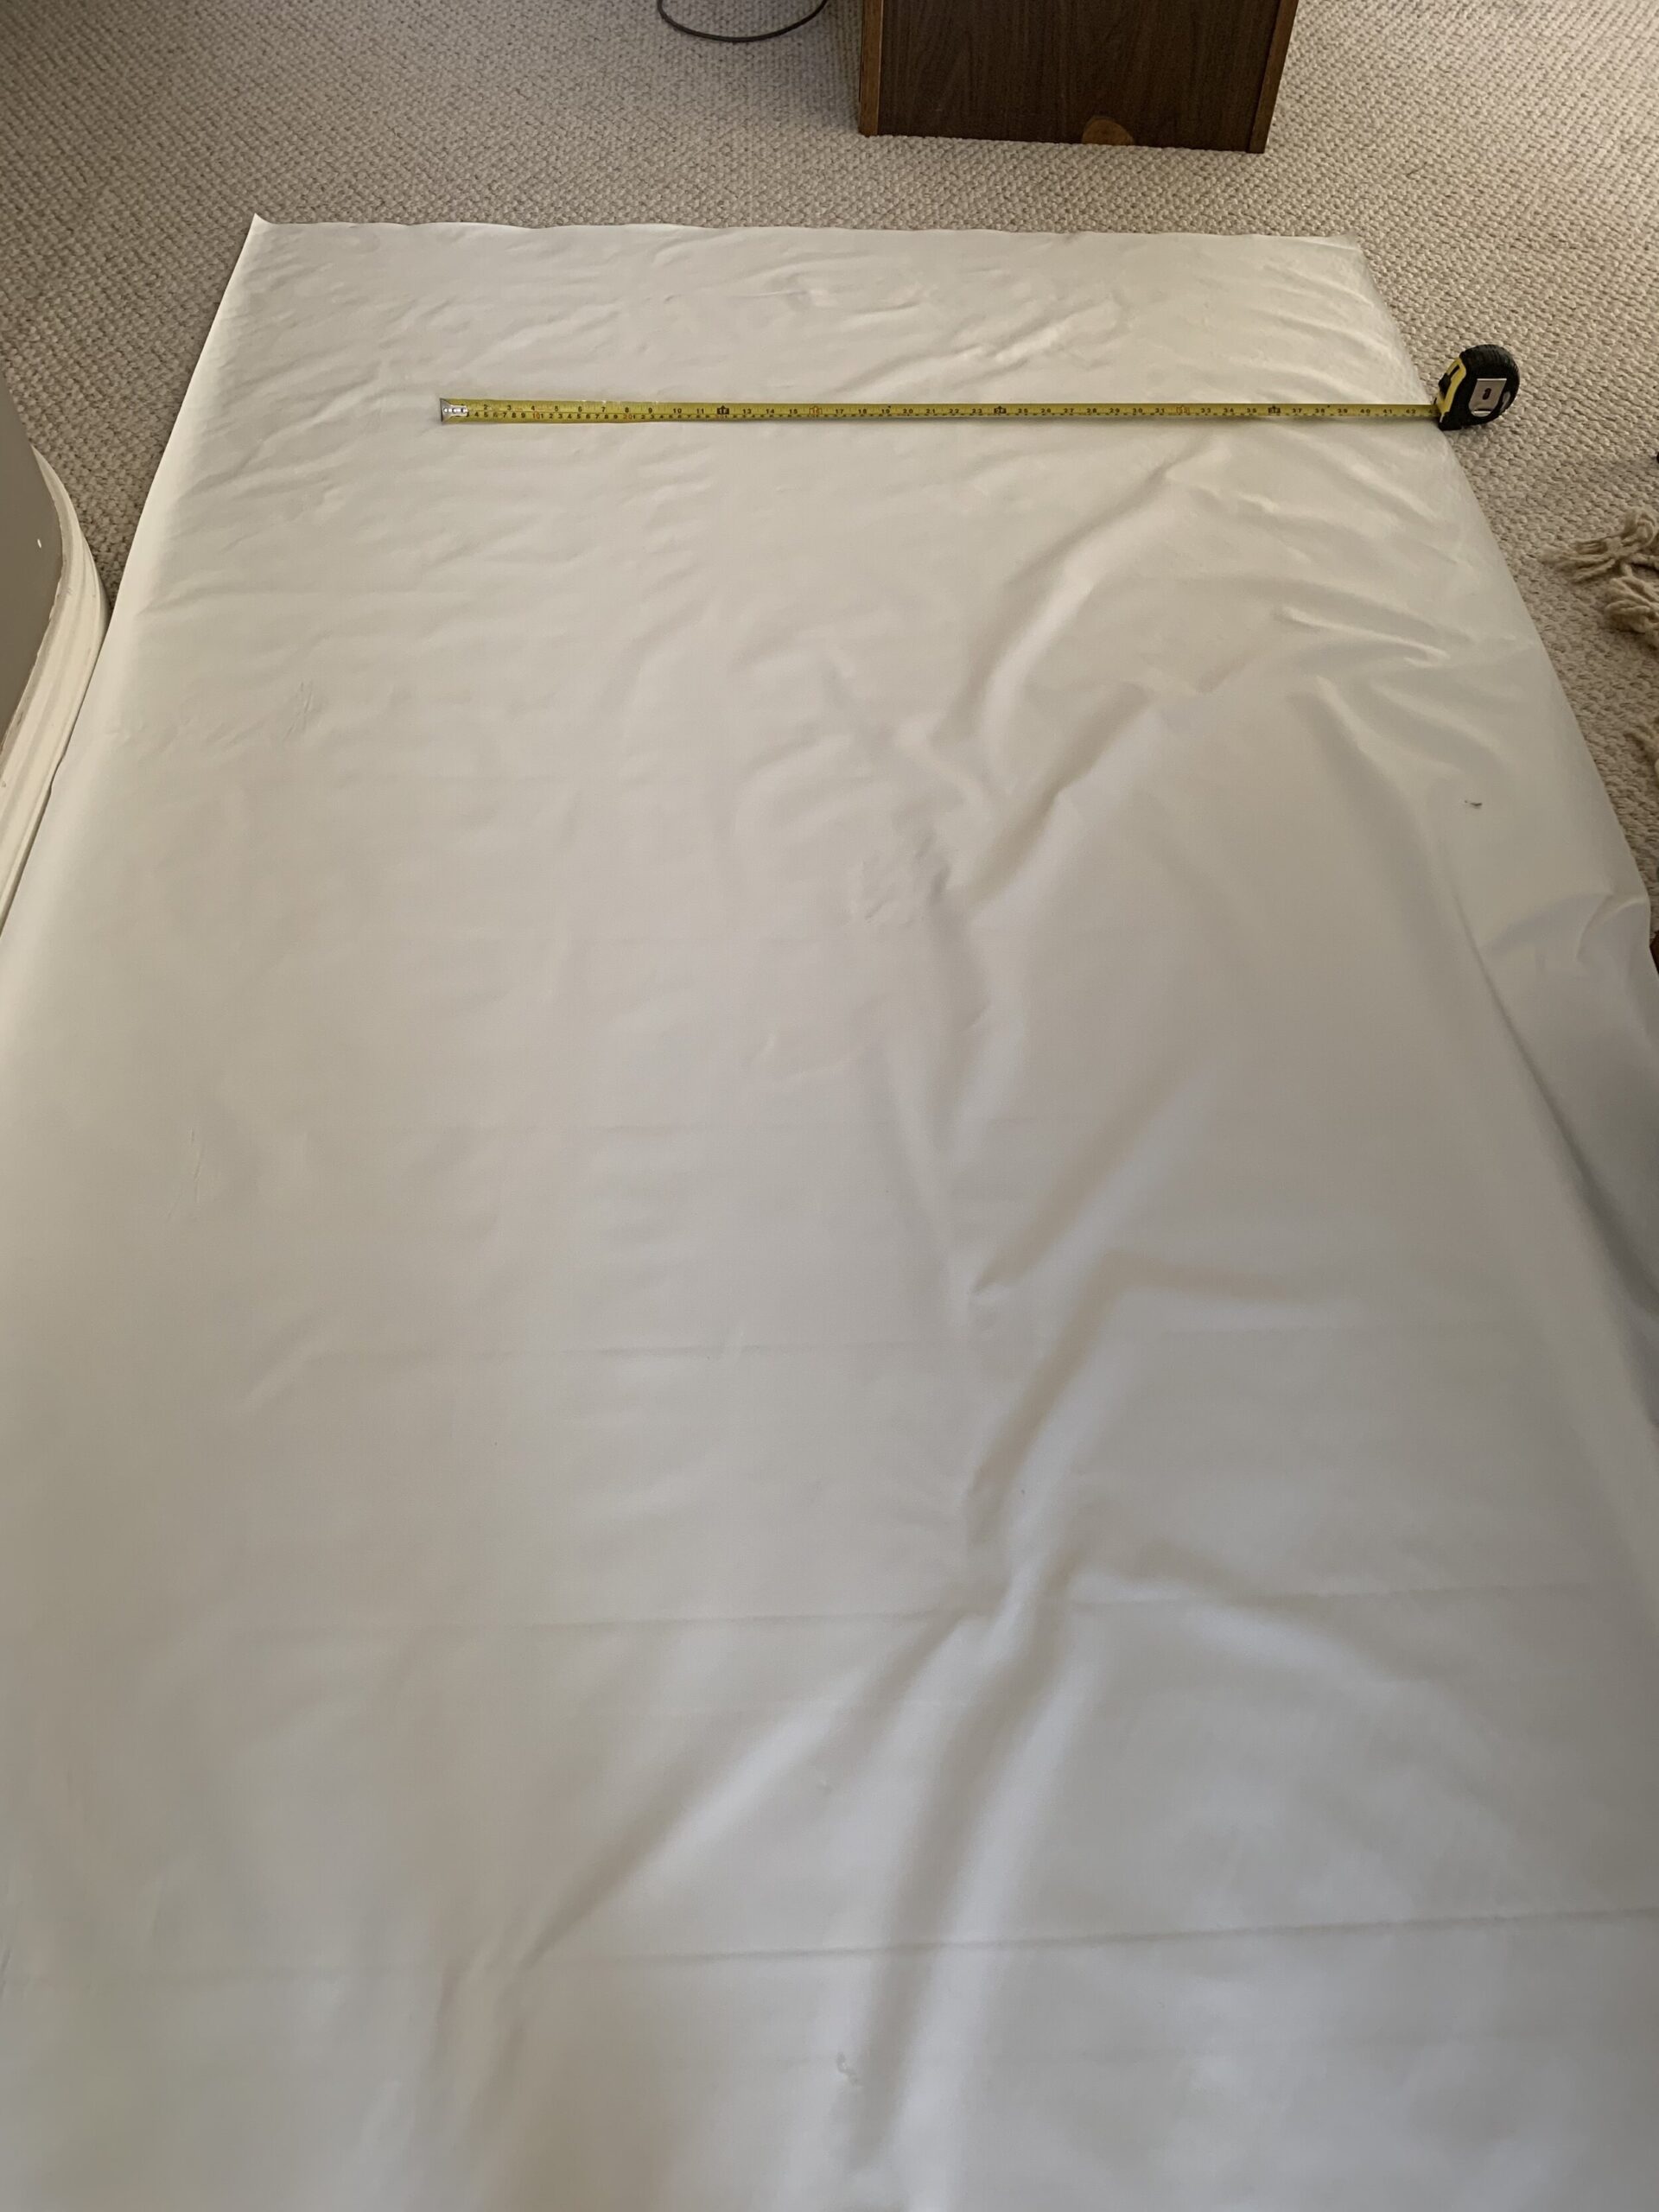 white lining fabric laying on ground and tape measure marking the width